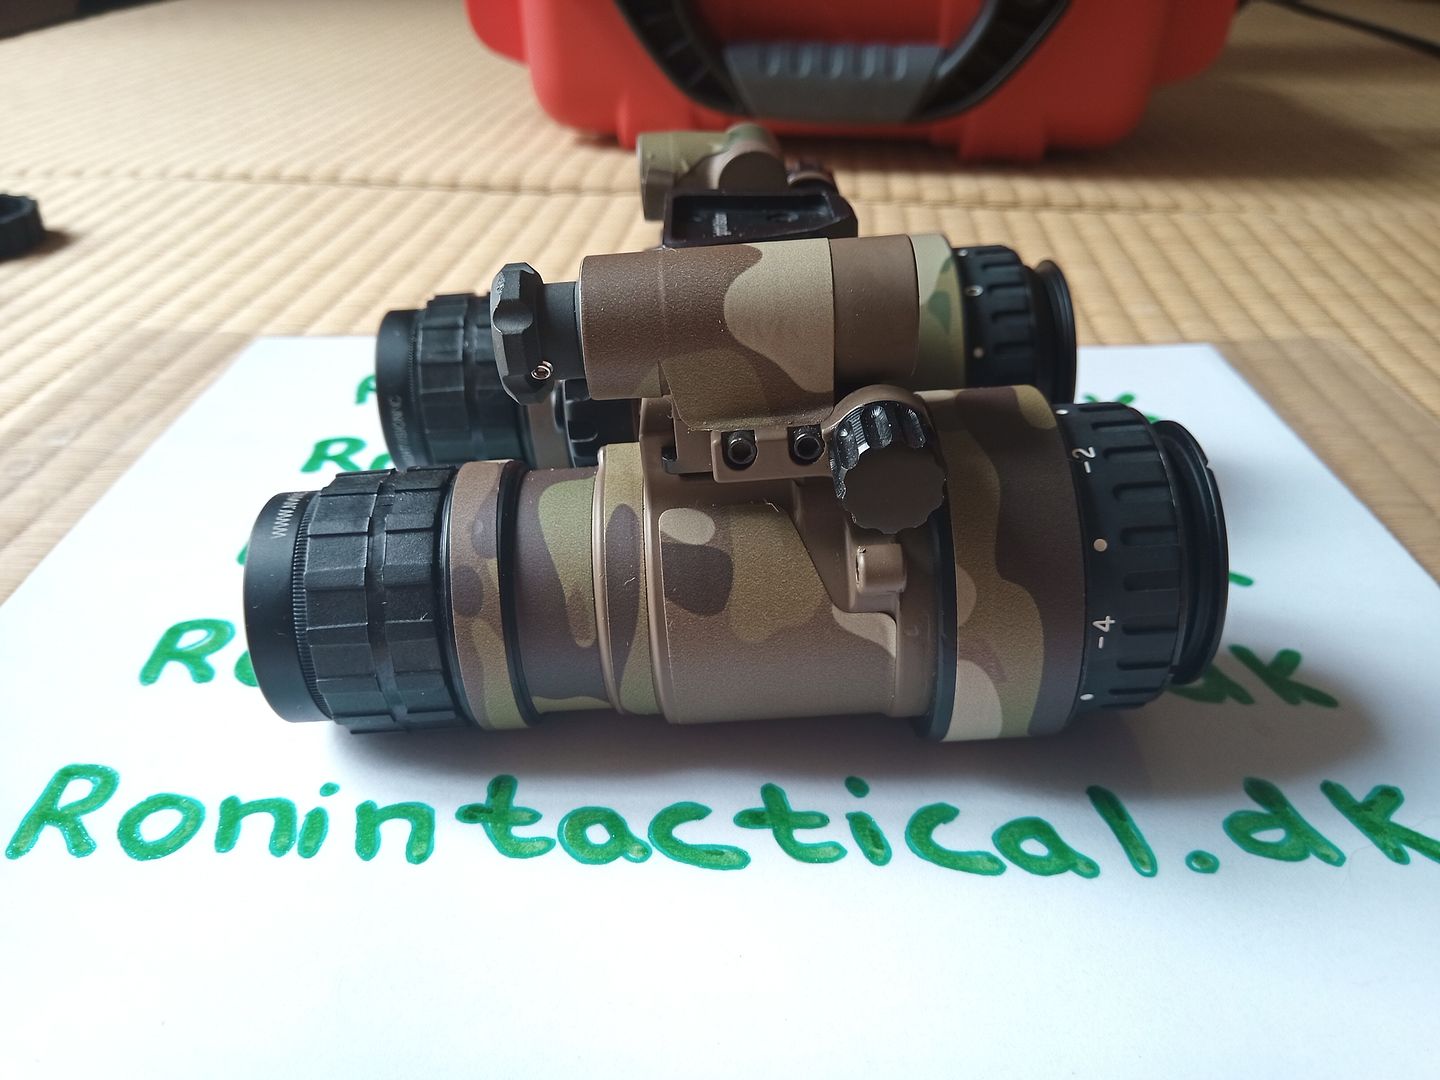 RNVG_Ruggedized_Night_Vision_Goggles_TAN-FDE_with_MULTICAM_Nocorium_RNVG_Wrap_(8)